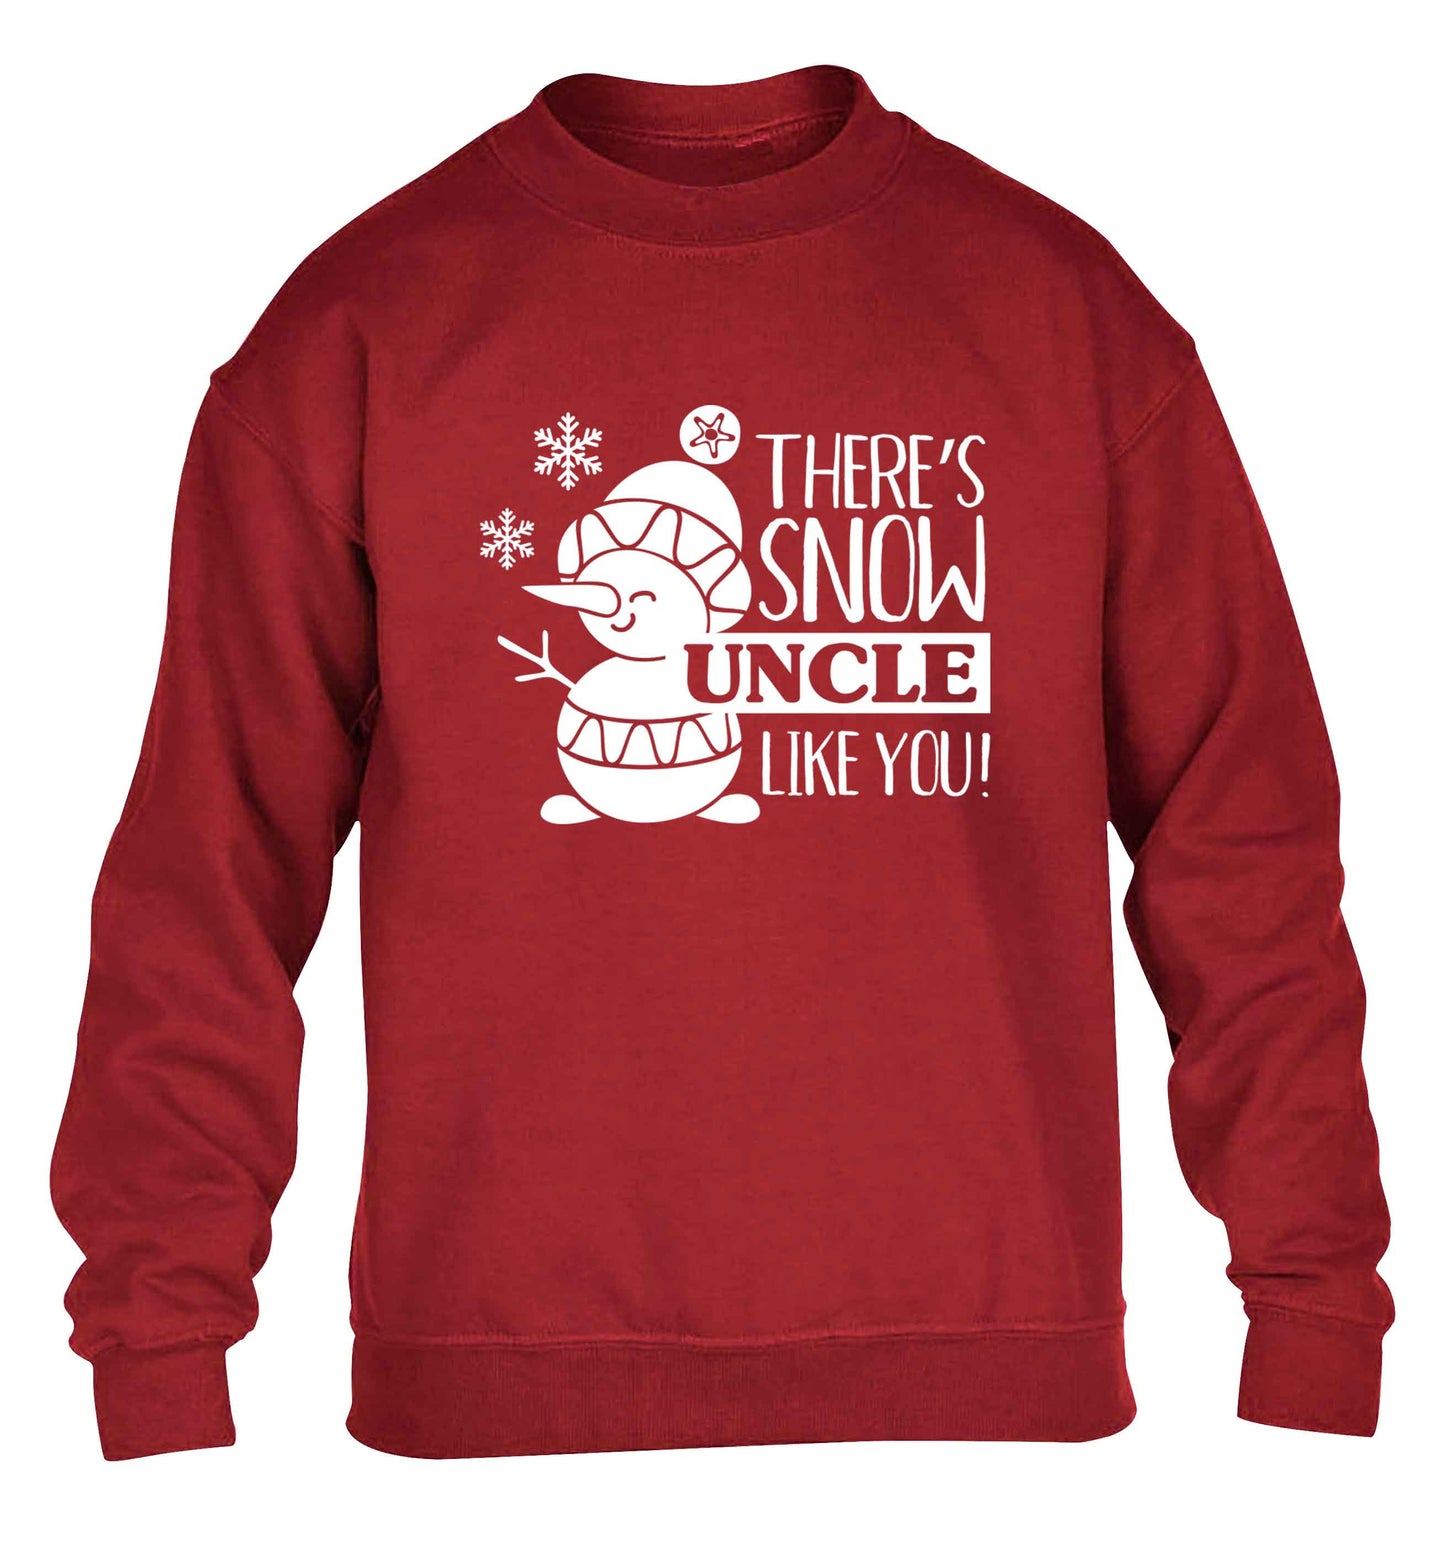 There's snow uncle like you children's grey sweater 12-13 Years